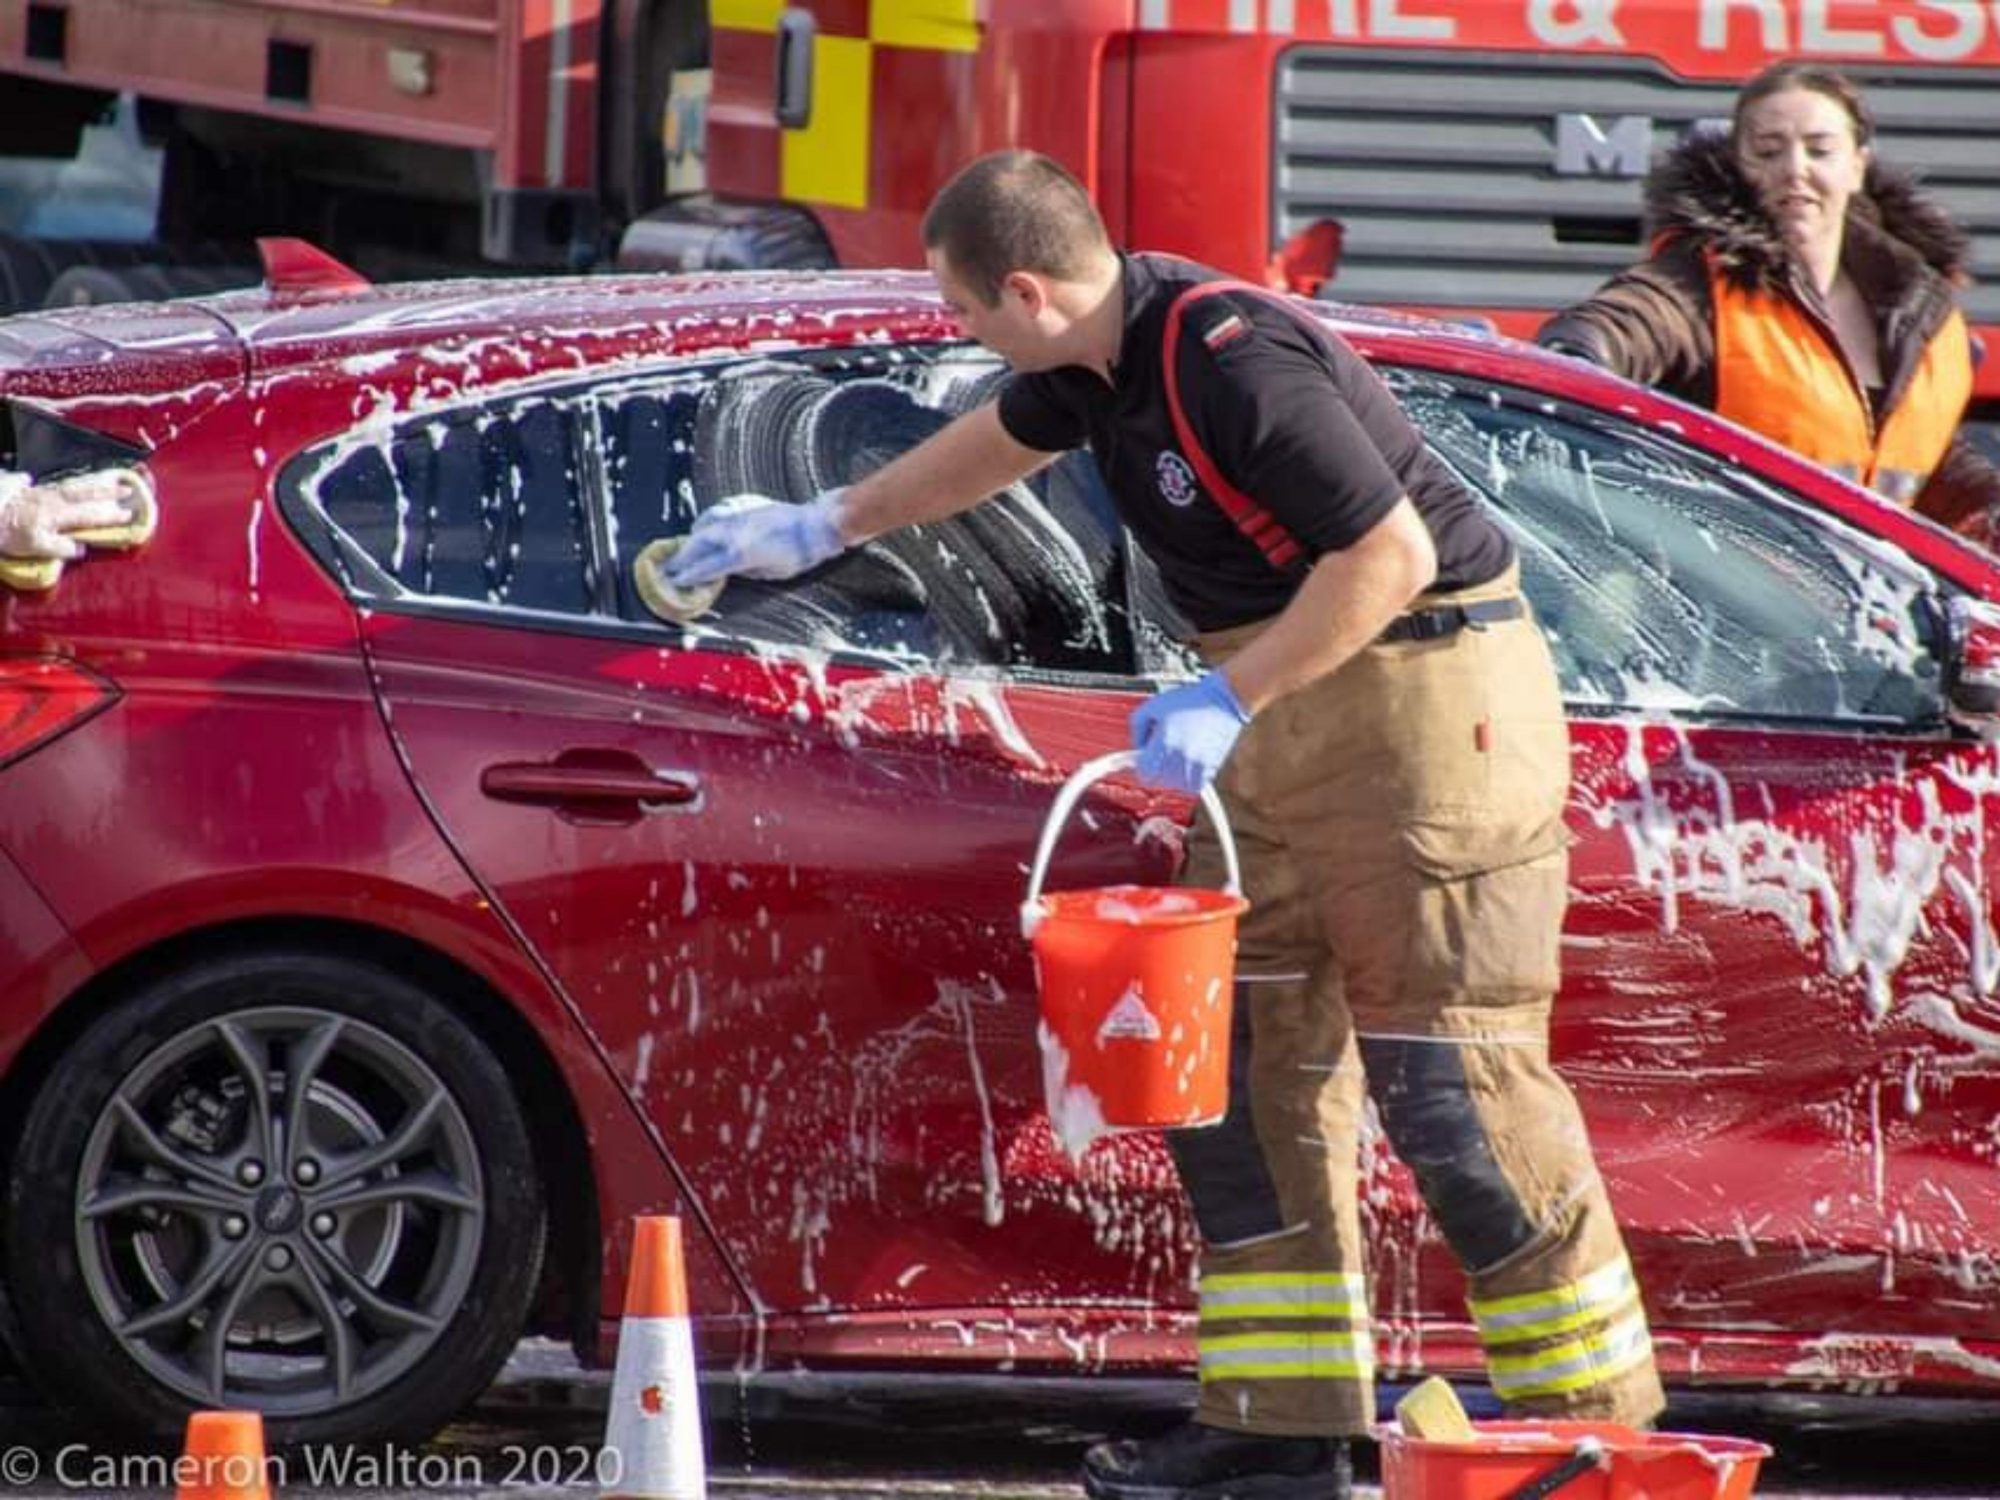 Firefighter and staff washing car for charity event